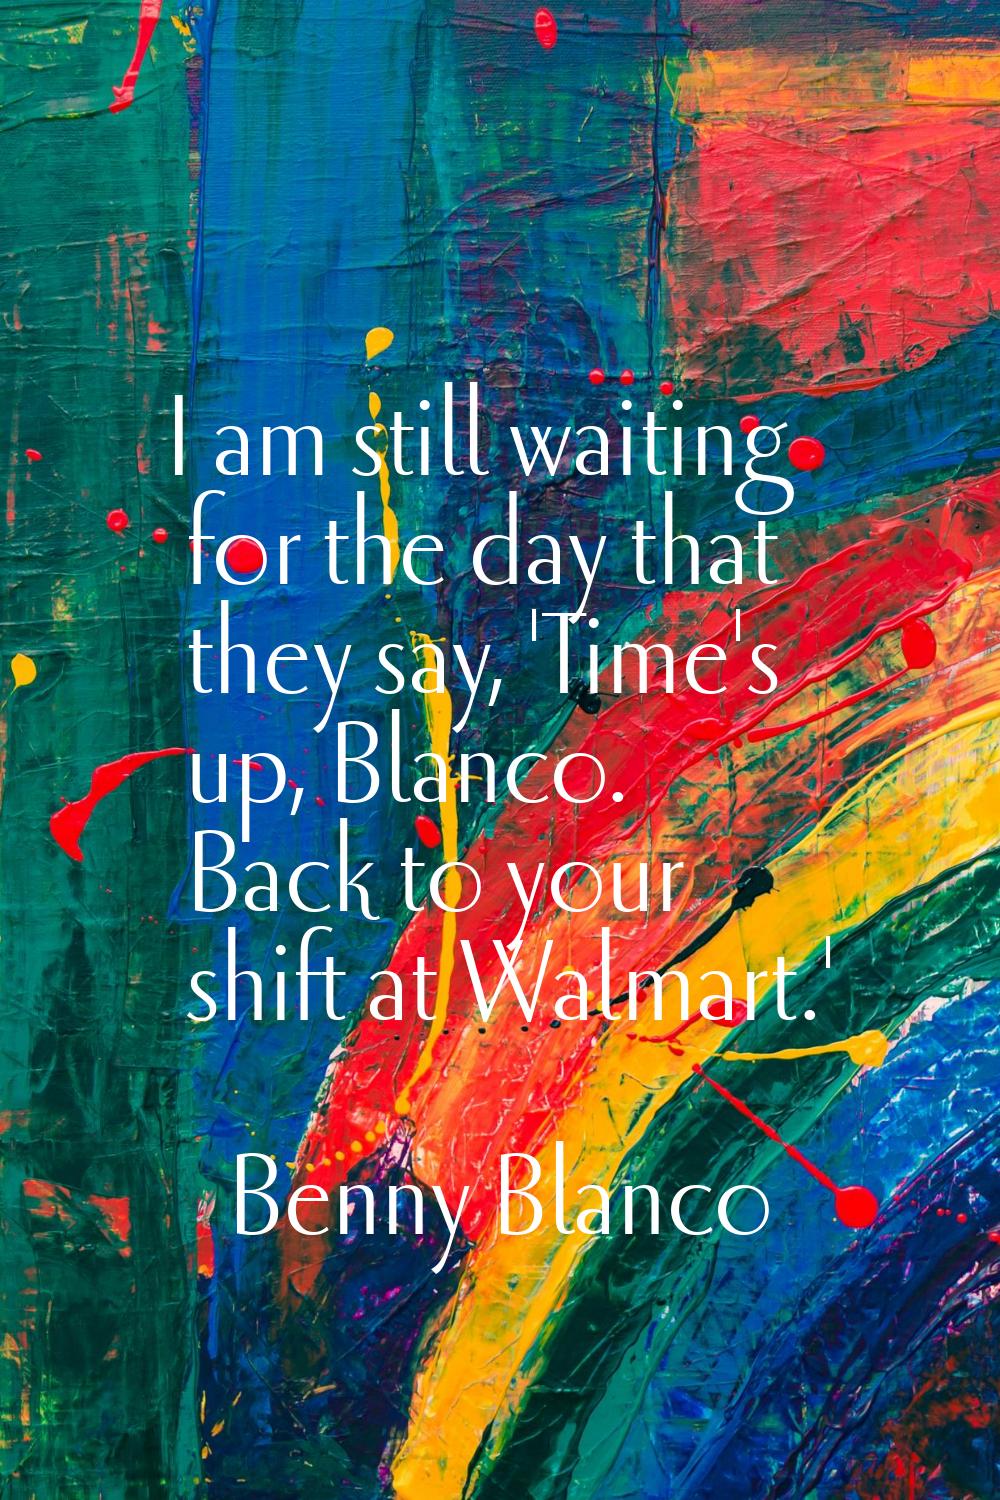 I am still waiting for the day that they say, 'Time's up, Blanco. Back to your shift at Walmart.'